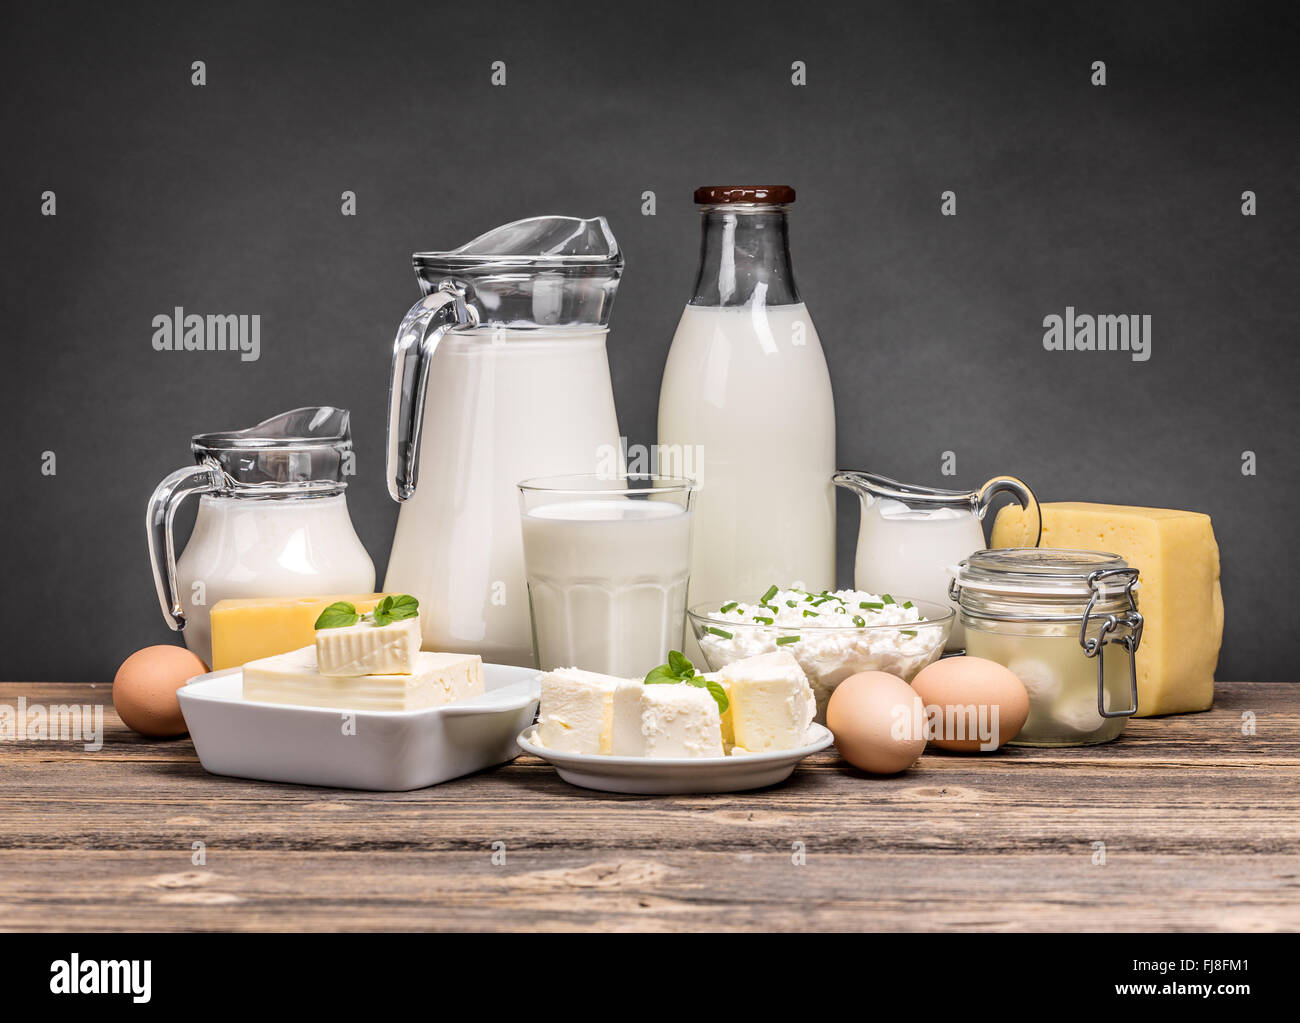 Assortment of dairy products on vintage wooden table Stock Photo